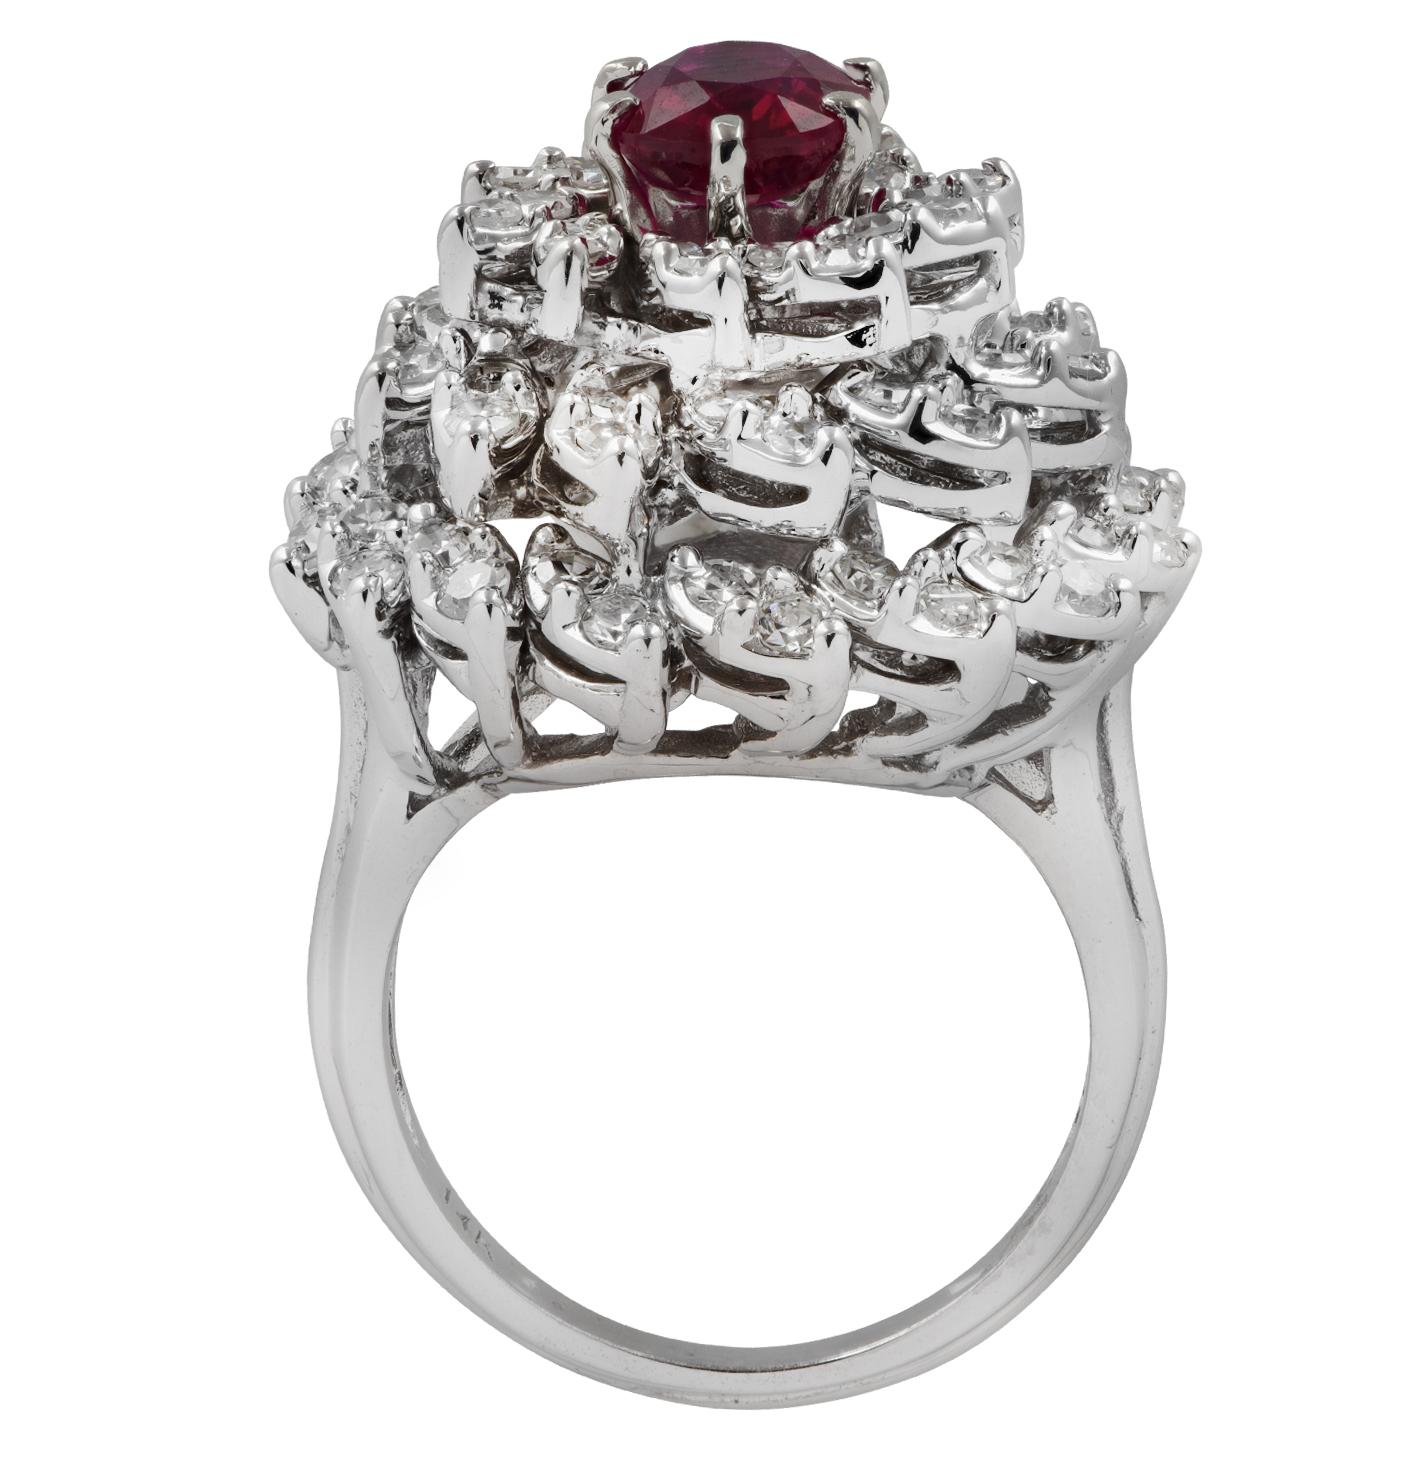 Spectacular cocktail ring crafted in white gold showcasing a GIA Certified oval ruby weighing 1.31 carats resting on a dome of 75 round brilliant cut diamonds weighing approximately 1 carat total, G color, VS clarity. The face of the ring measures